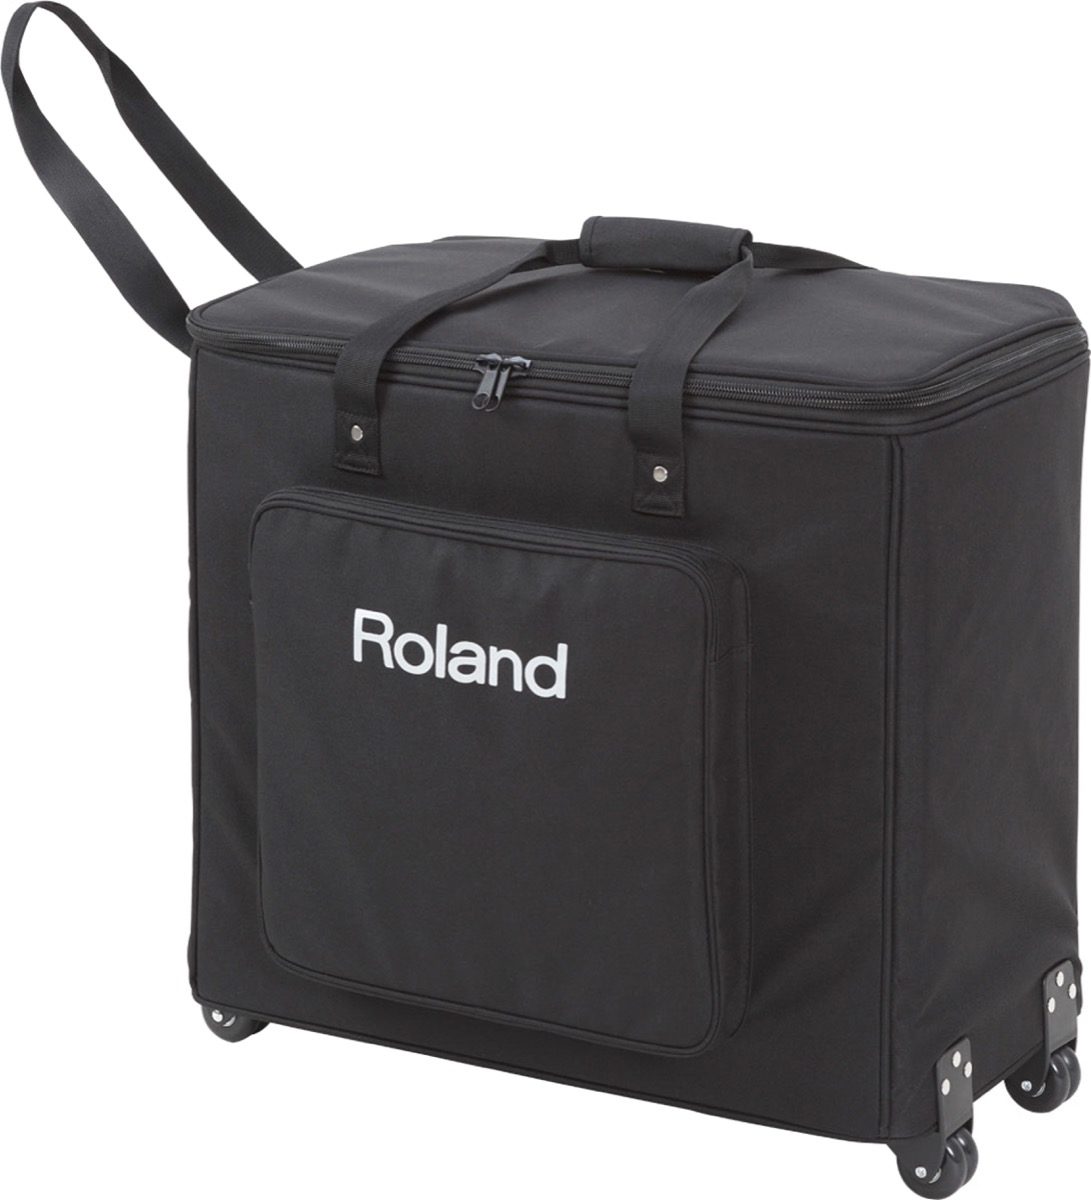 Roland CUBE Street EX PA Battery-Powered Stereo PA System